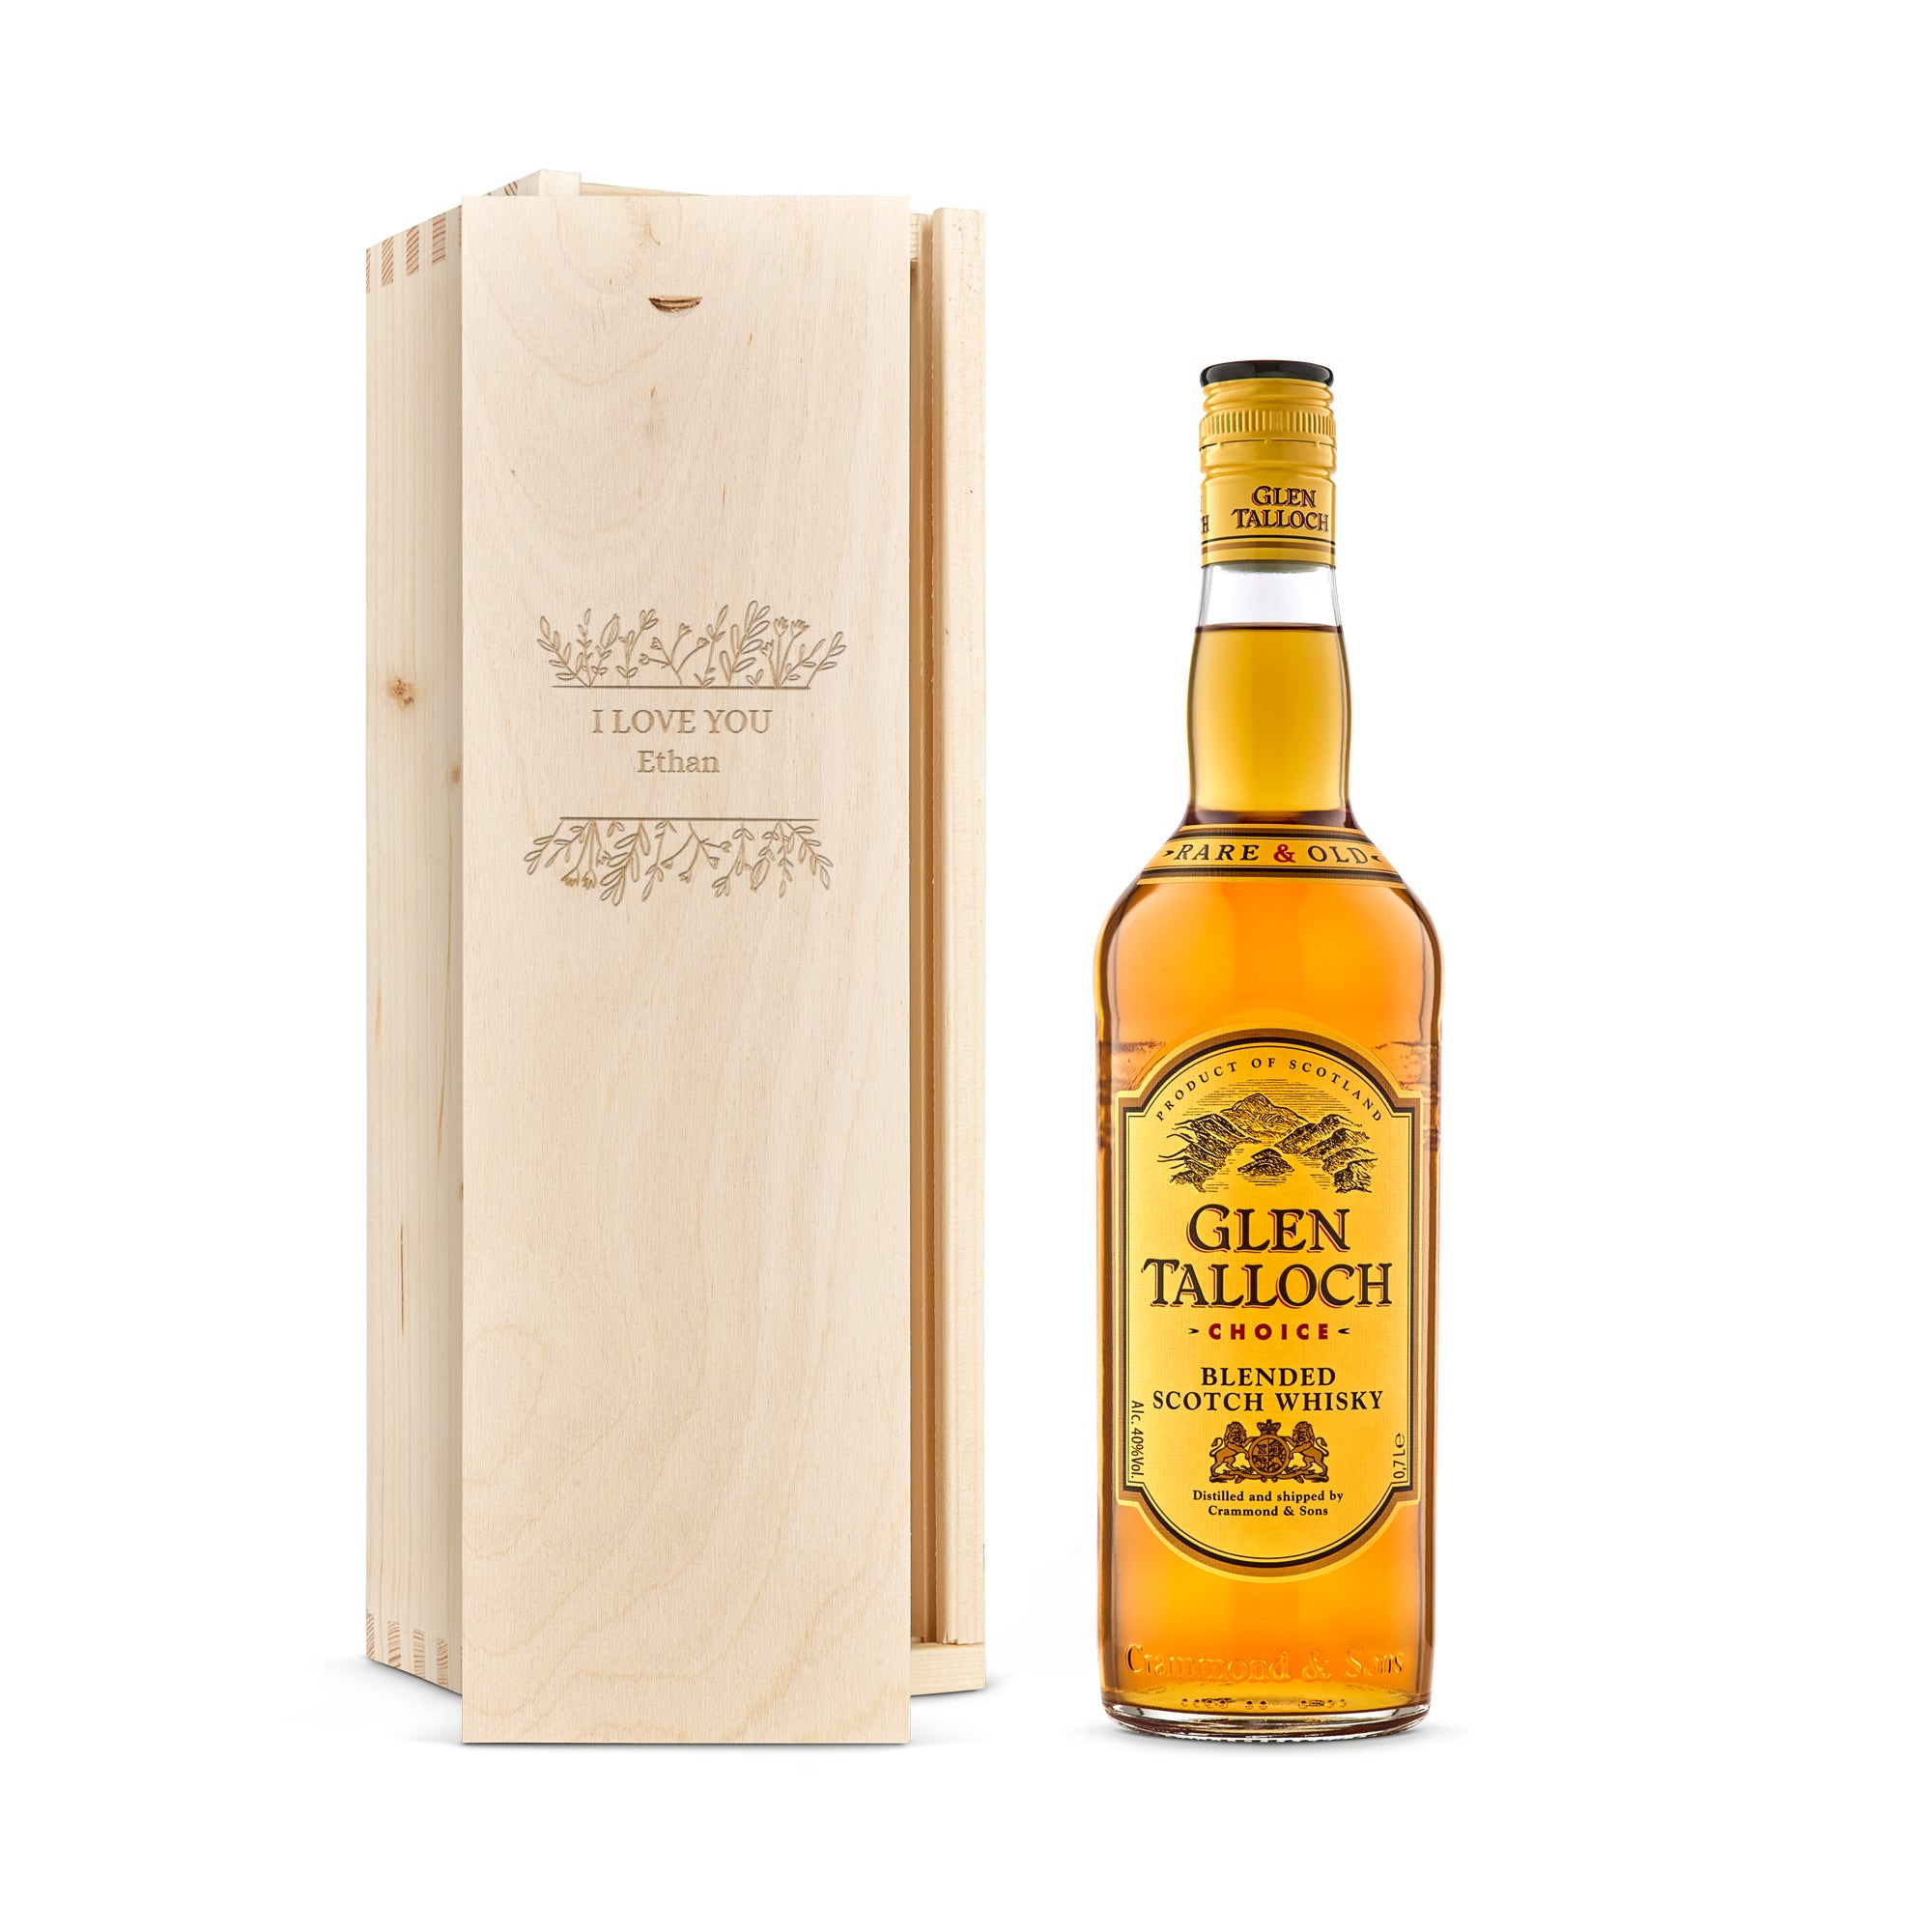 Personalised whiskey gift - Glen Talloch - Engraved wooden case